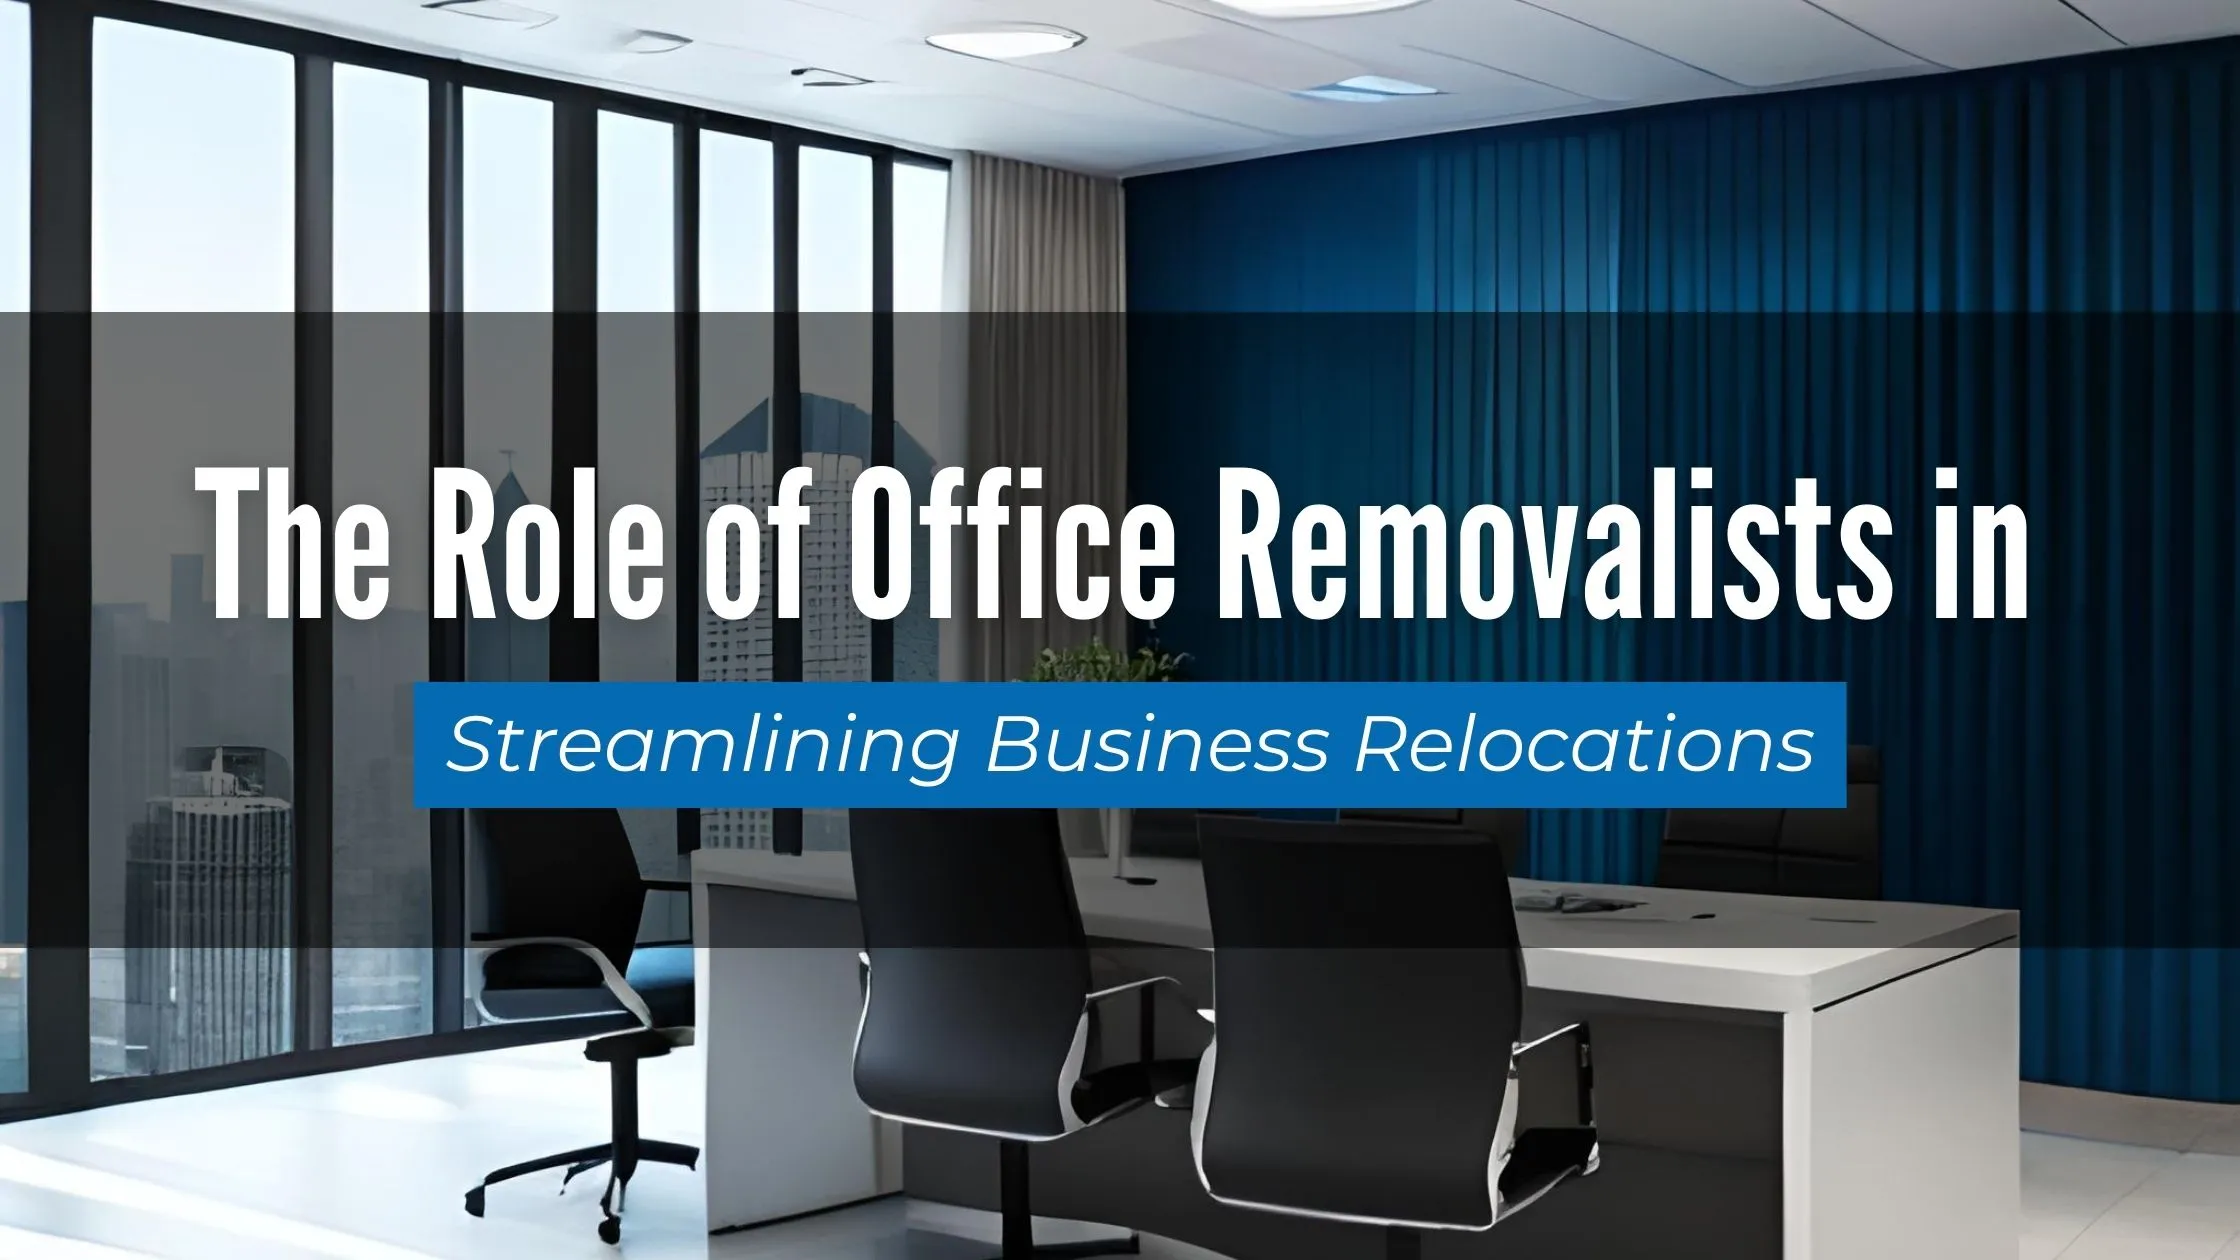 The Role of Office Removalists in Streamlining Business Relocations